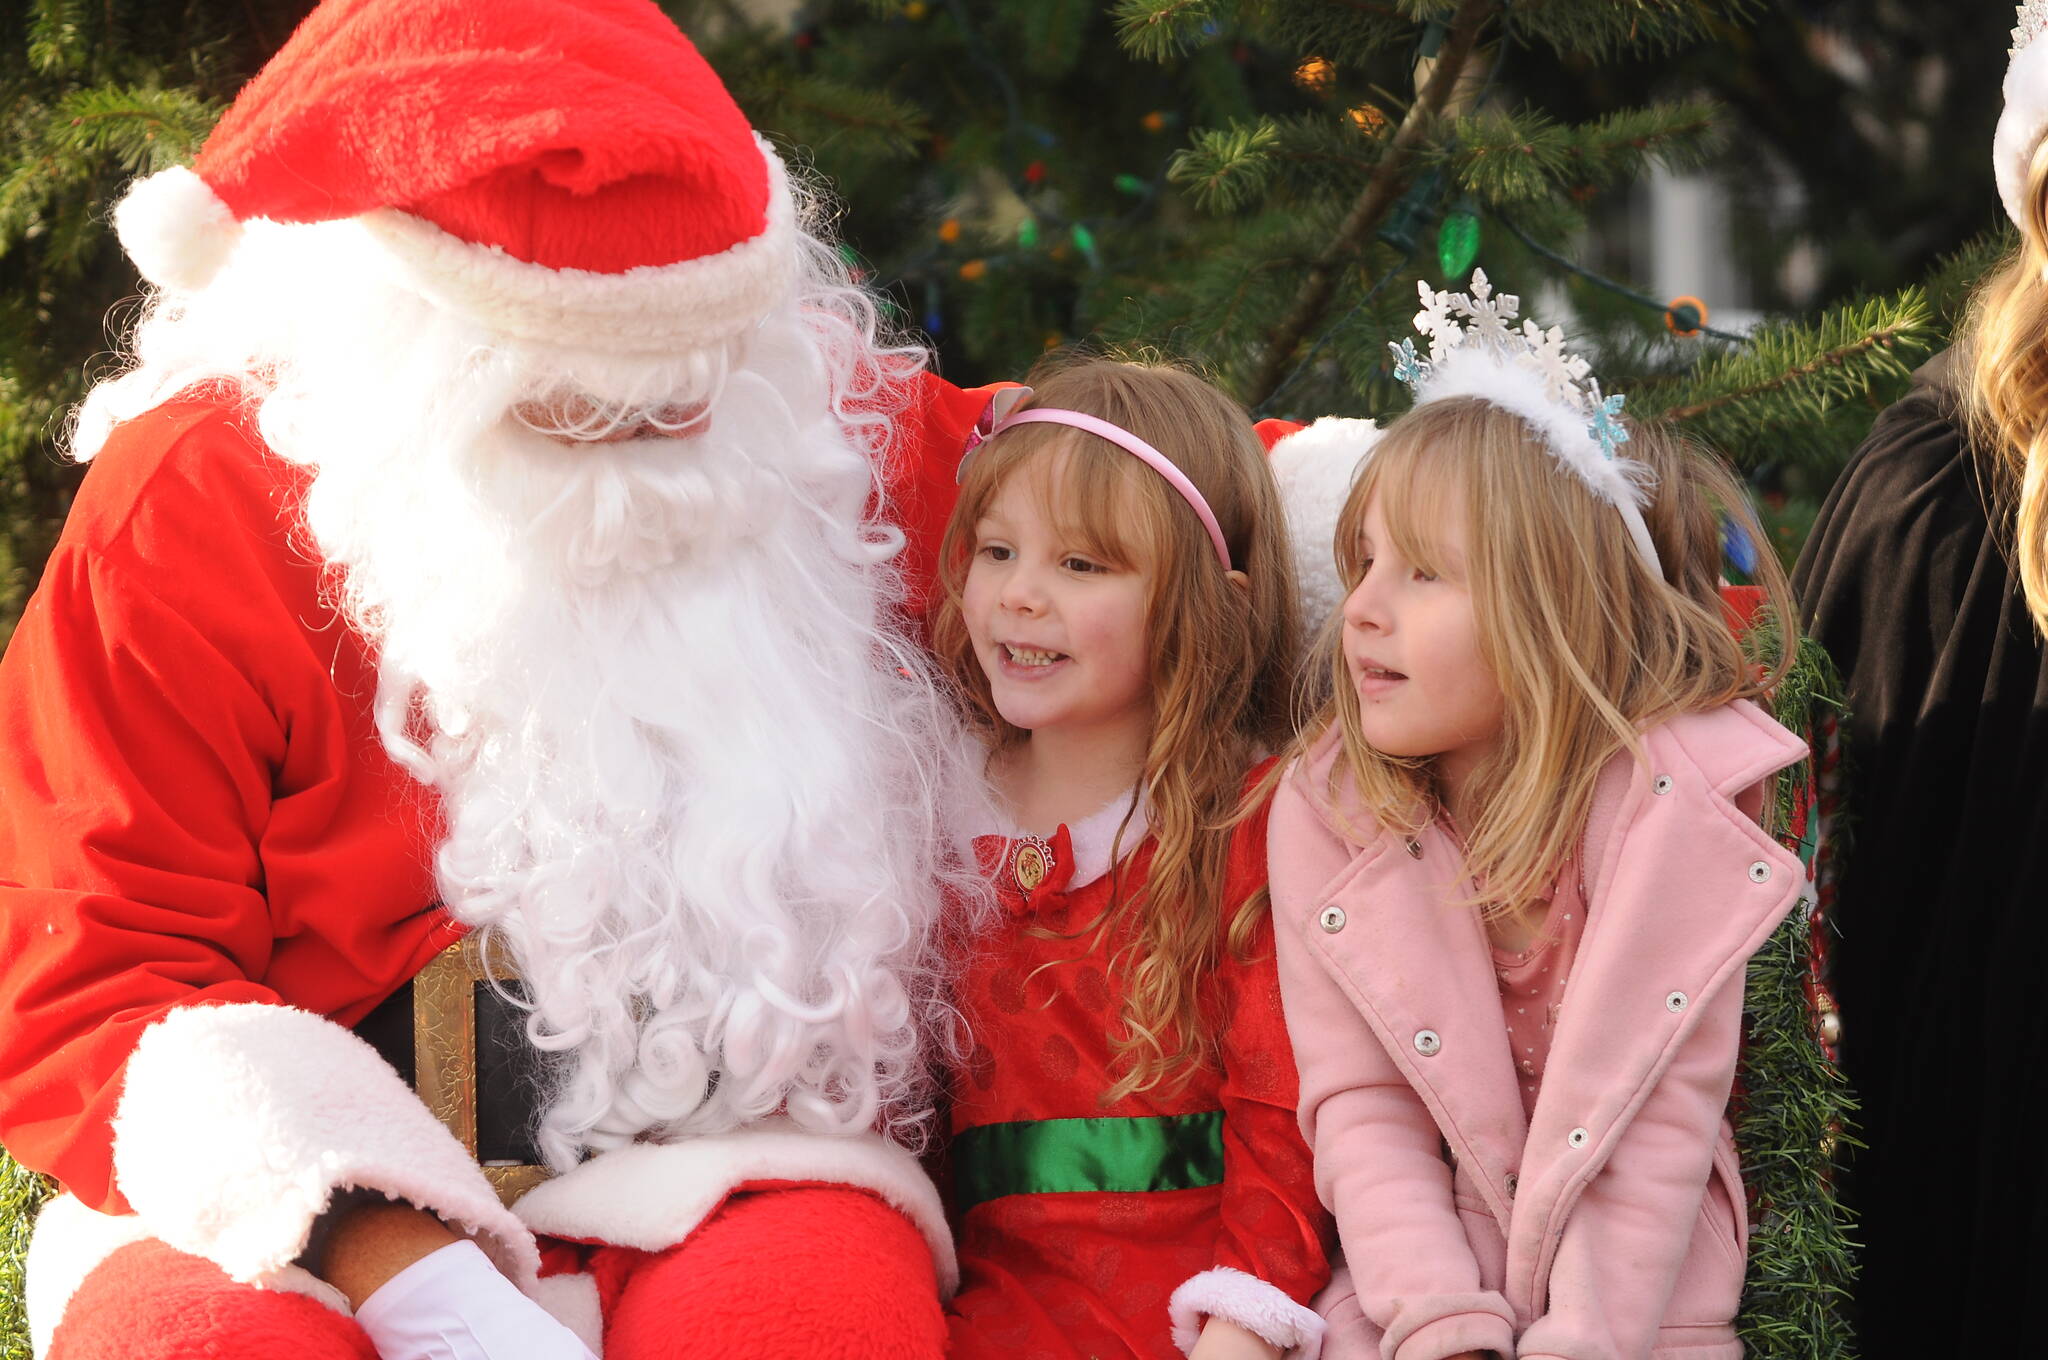 Above: Silver Newell, center, and Lucy Johnson, both 5-year-olds from Sequim, talk with Santa Claus (Stephen Rosales) at the Hometown Holidays event Saturday afternoon in downtown Sequim. The pair are best friends from preschool.